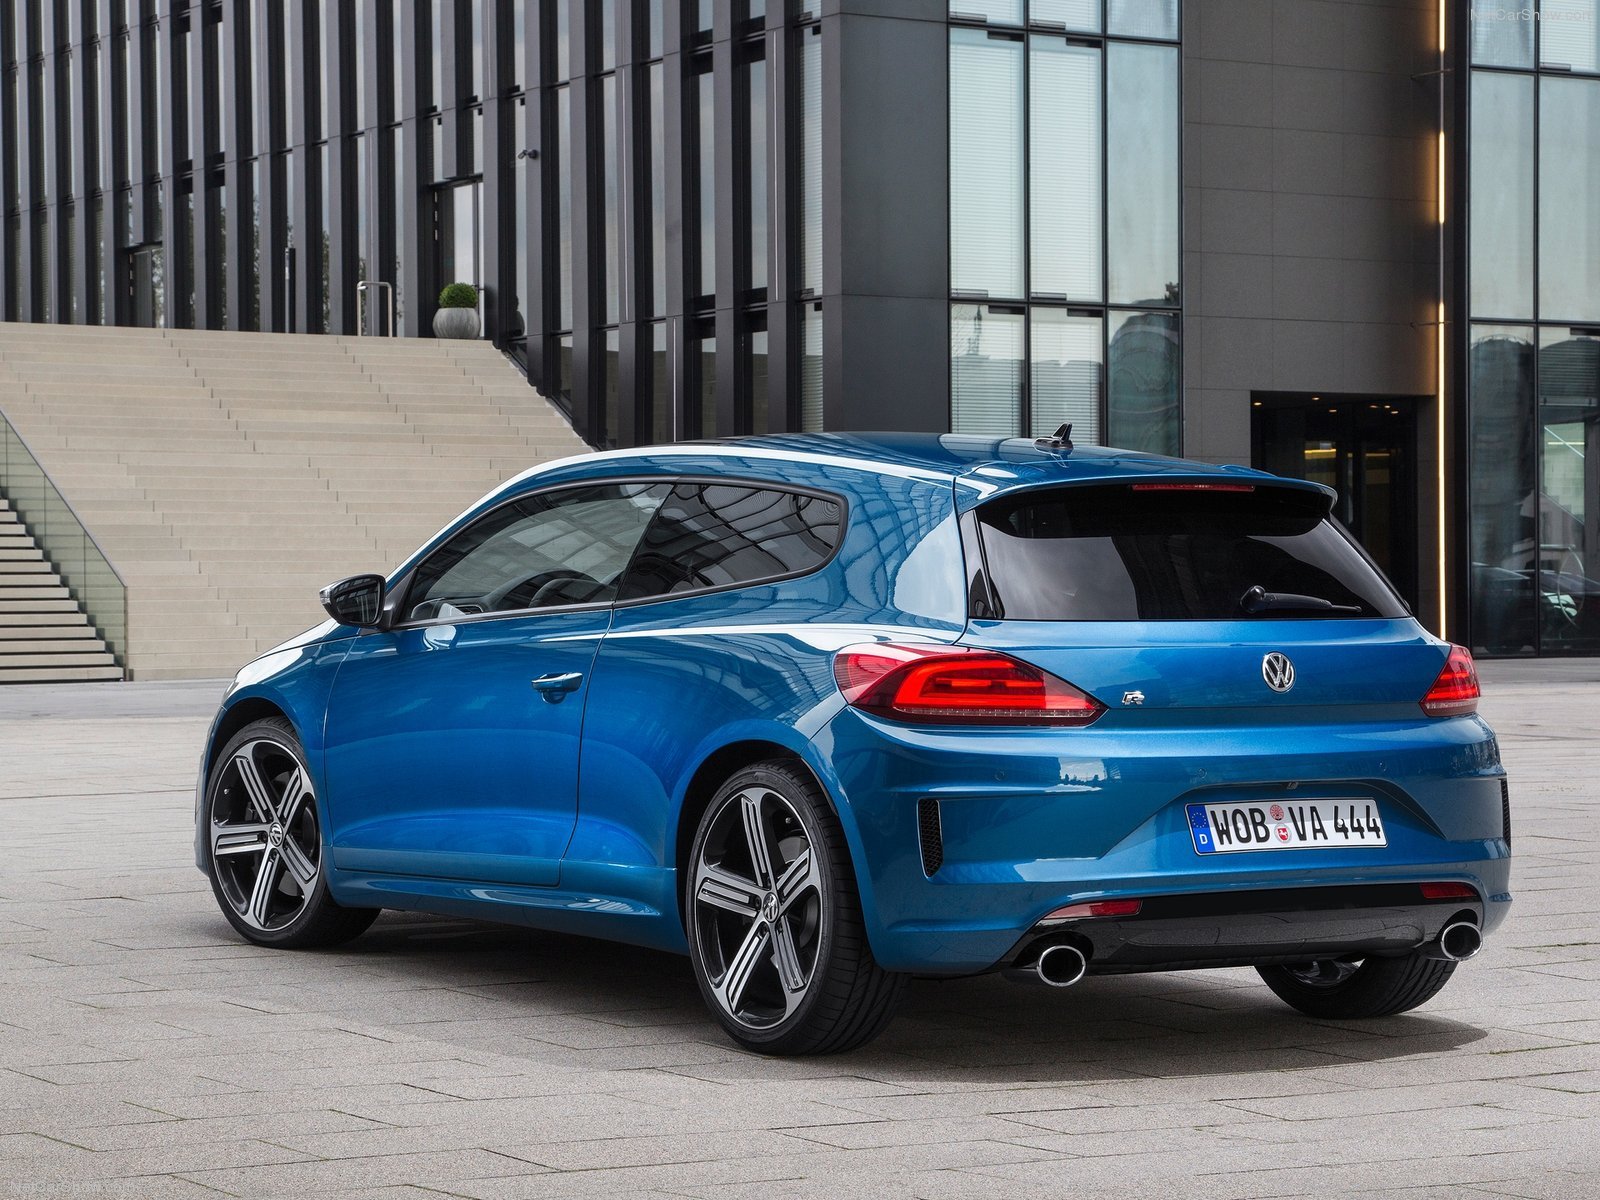 2014 Volkswagen Scirocco R Car Coupe Germany Bleue Blue Bl